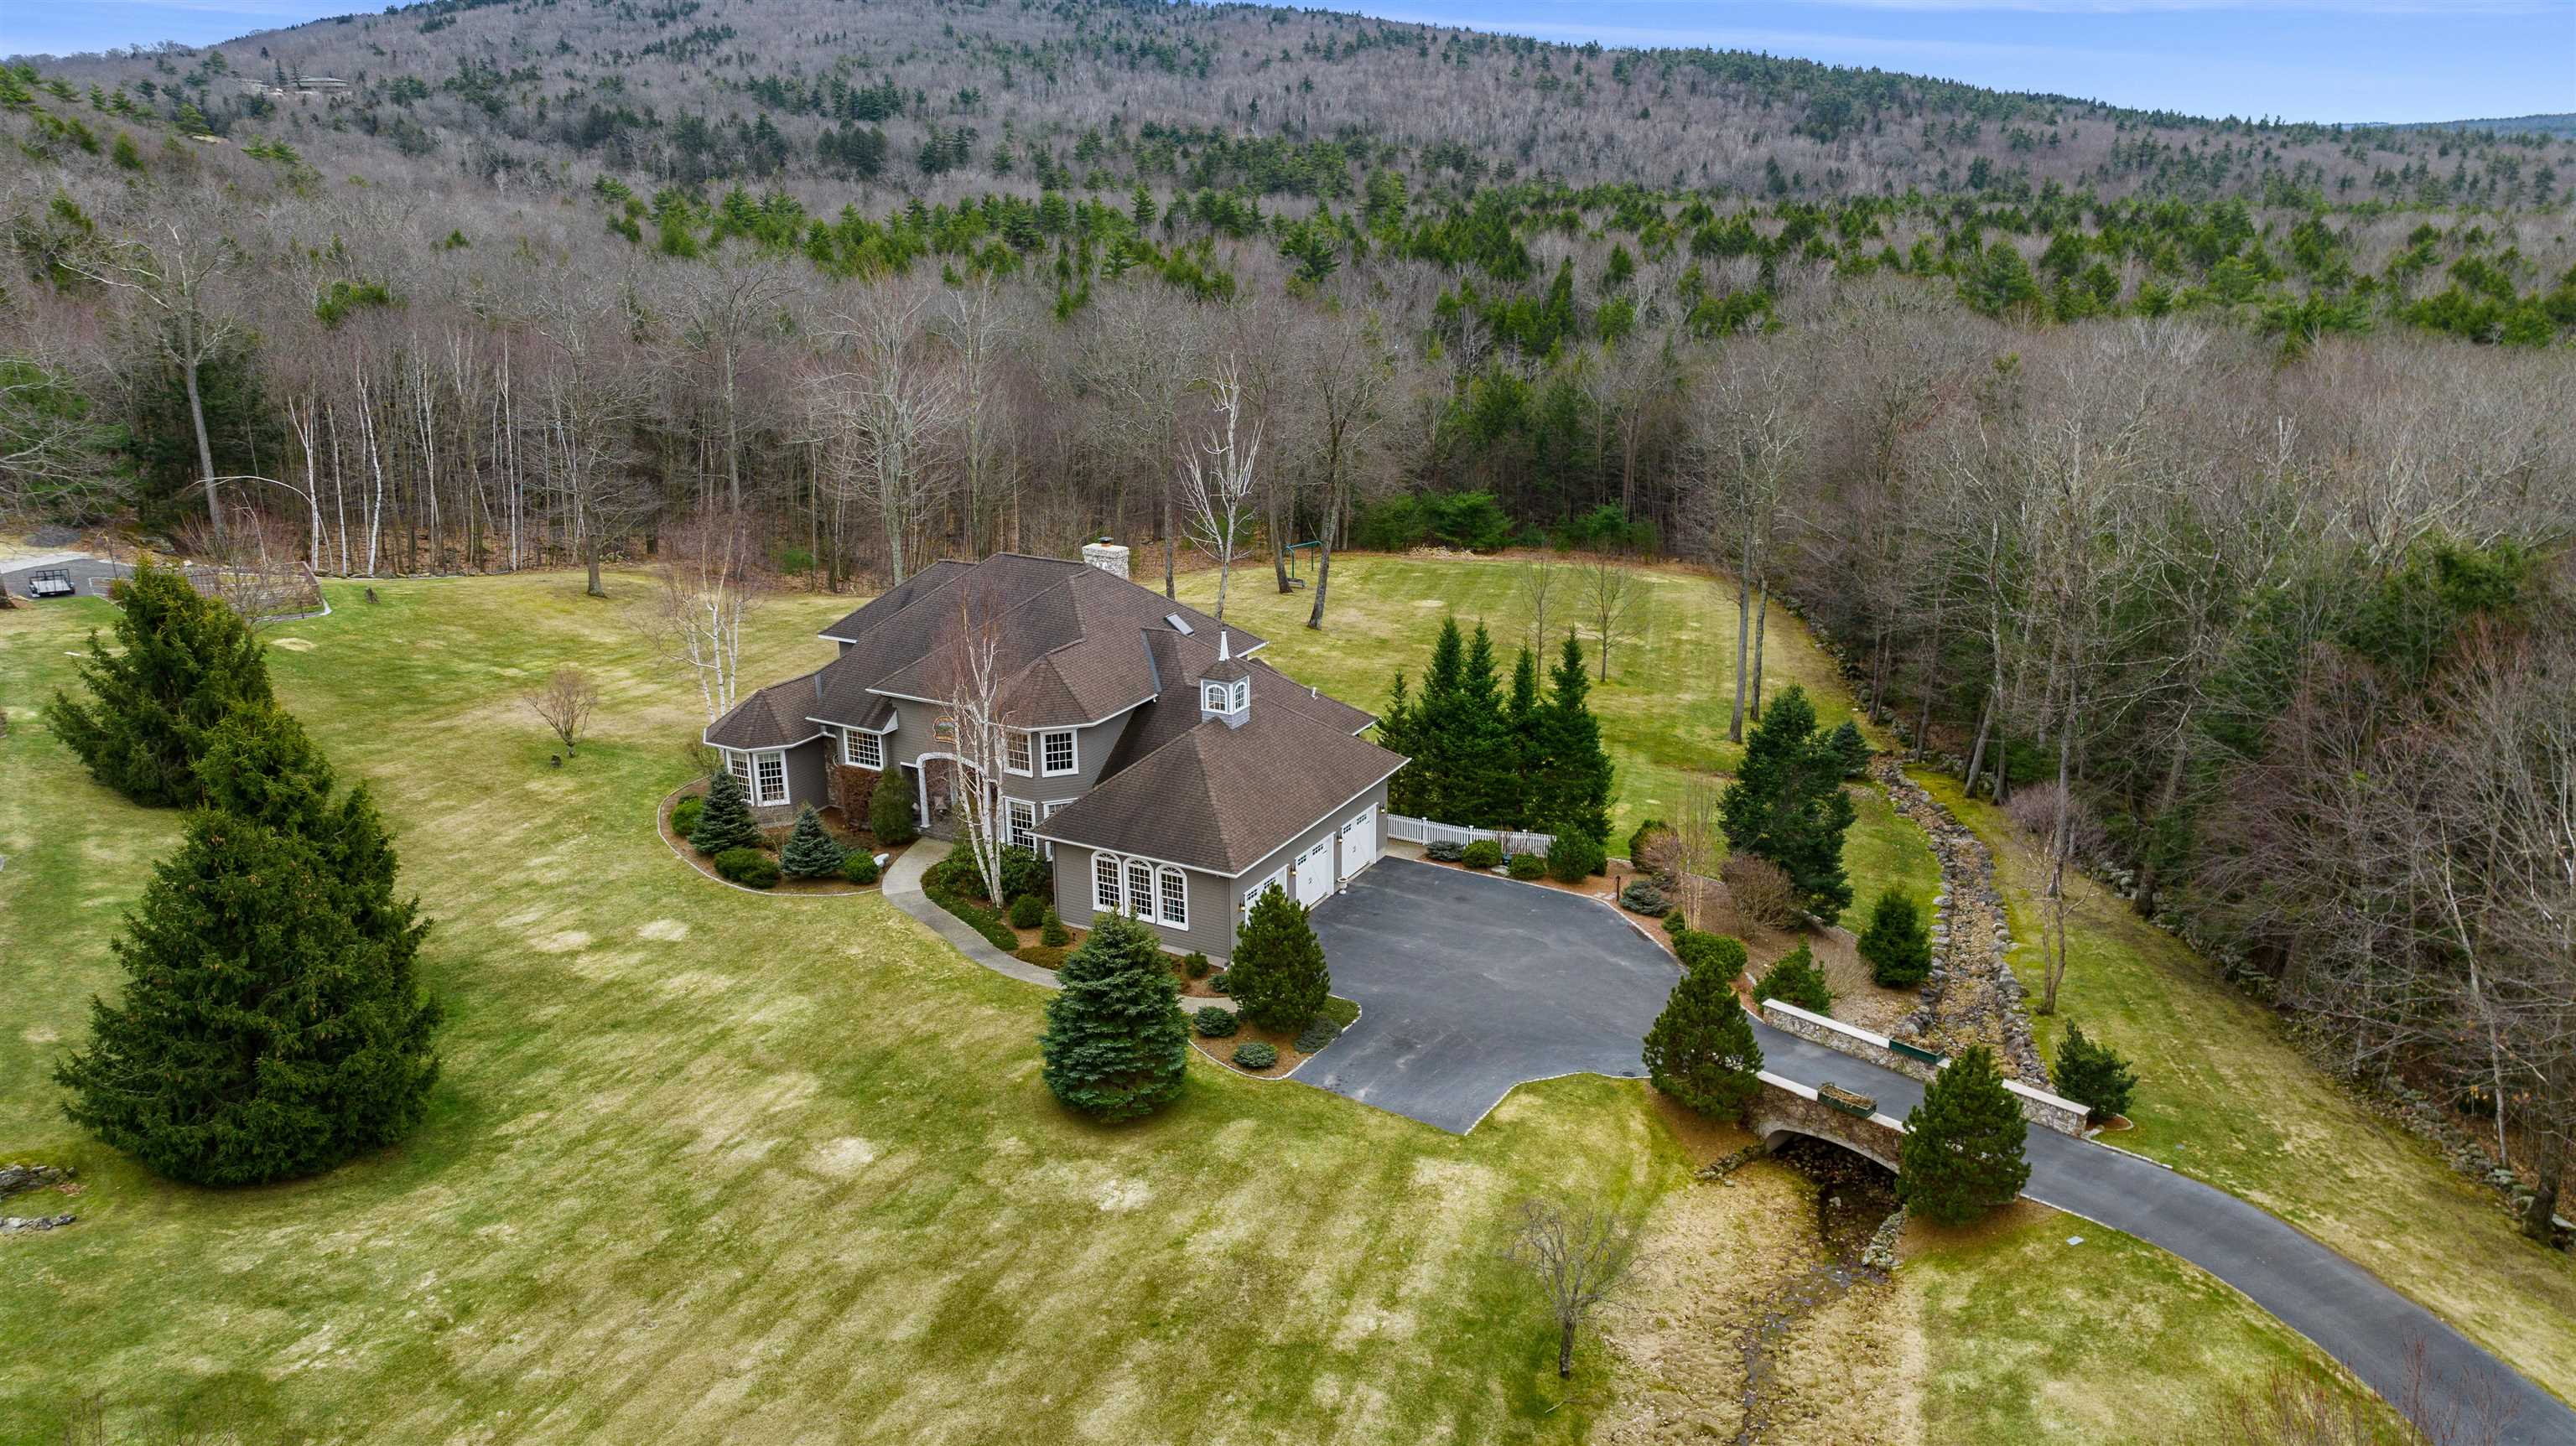 611 Old Mountain Road, Peterborough, New Hampshire, 03458, United States, 6 Bedrooms Bedrooms, ,3 BathroomsBathrooms,Residential,For Sale,611 Old Mountain Road,1498404